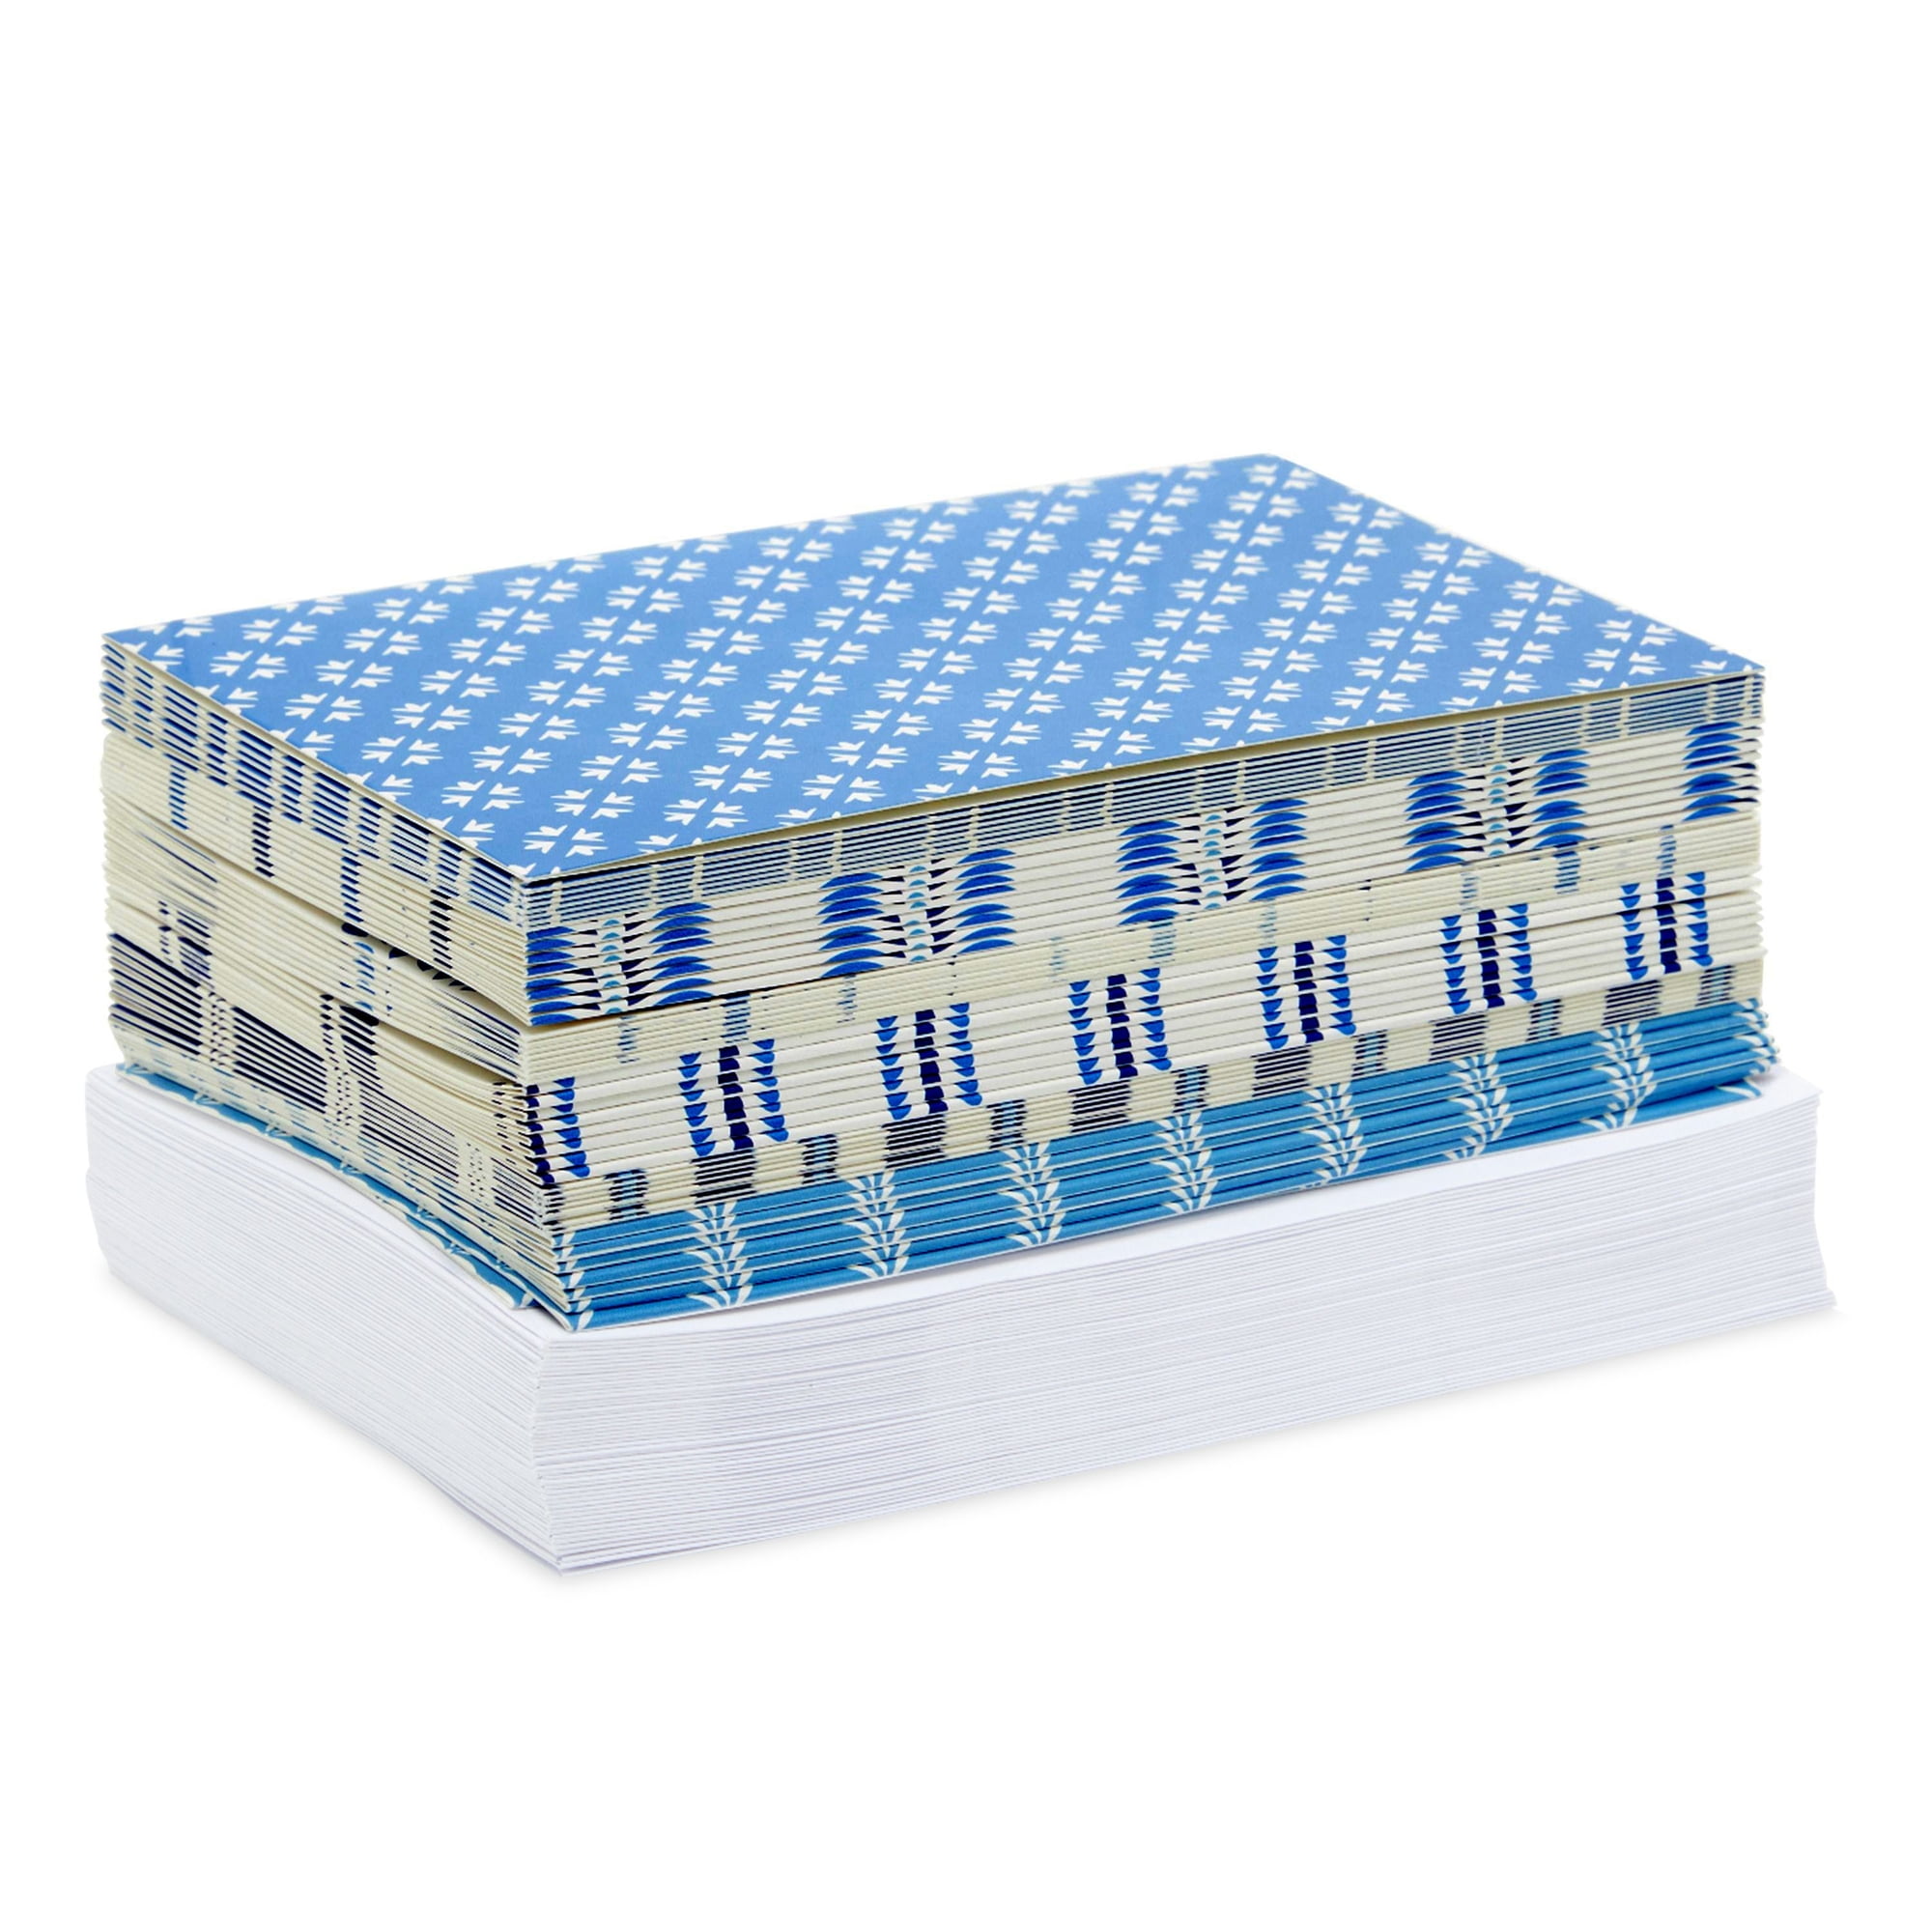 Blue & White Note Cards, 24 Blank Cards: 8 Unique Designs with 25 Patterned  Envelopes (Other)